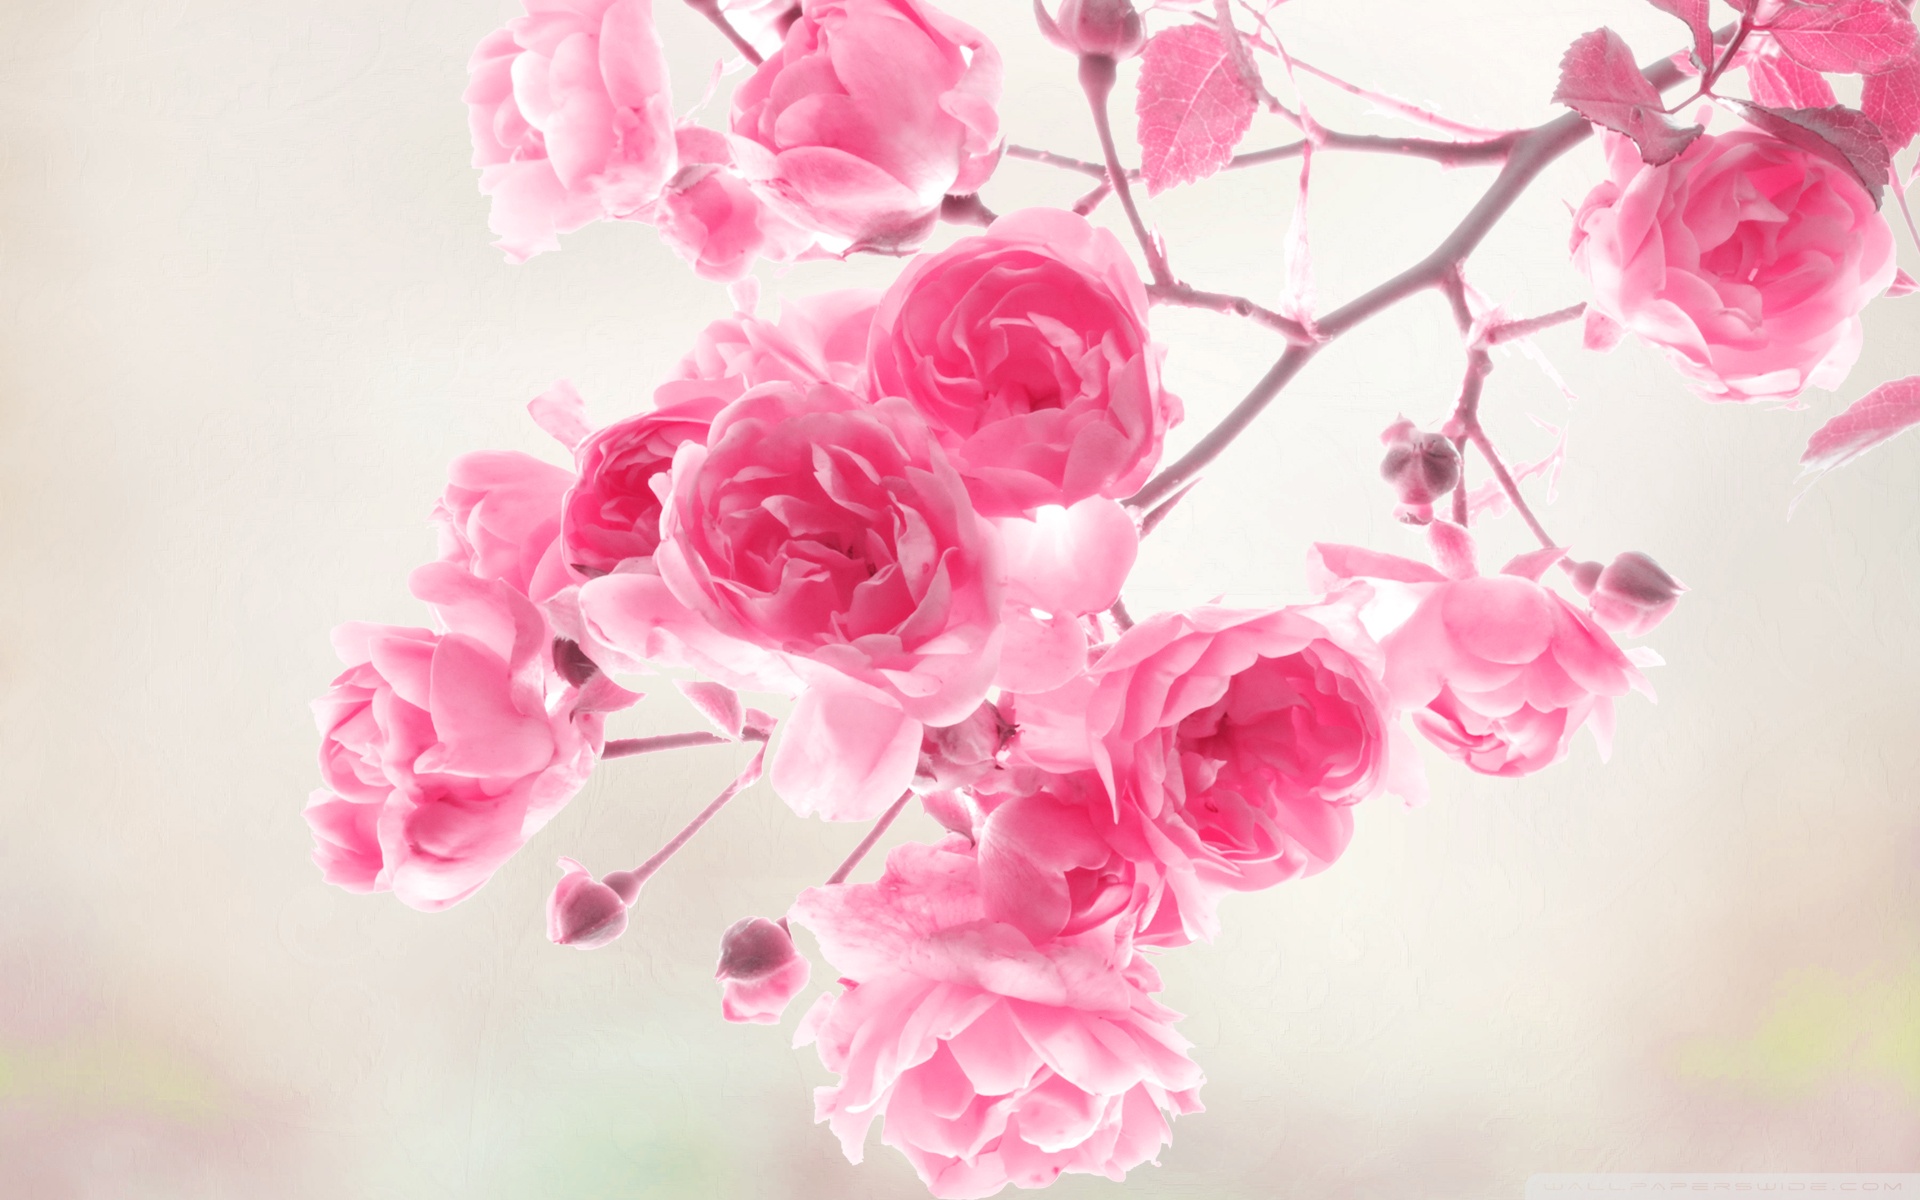 Pink Roses Wallpaper 23395 1920x1200px